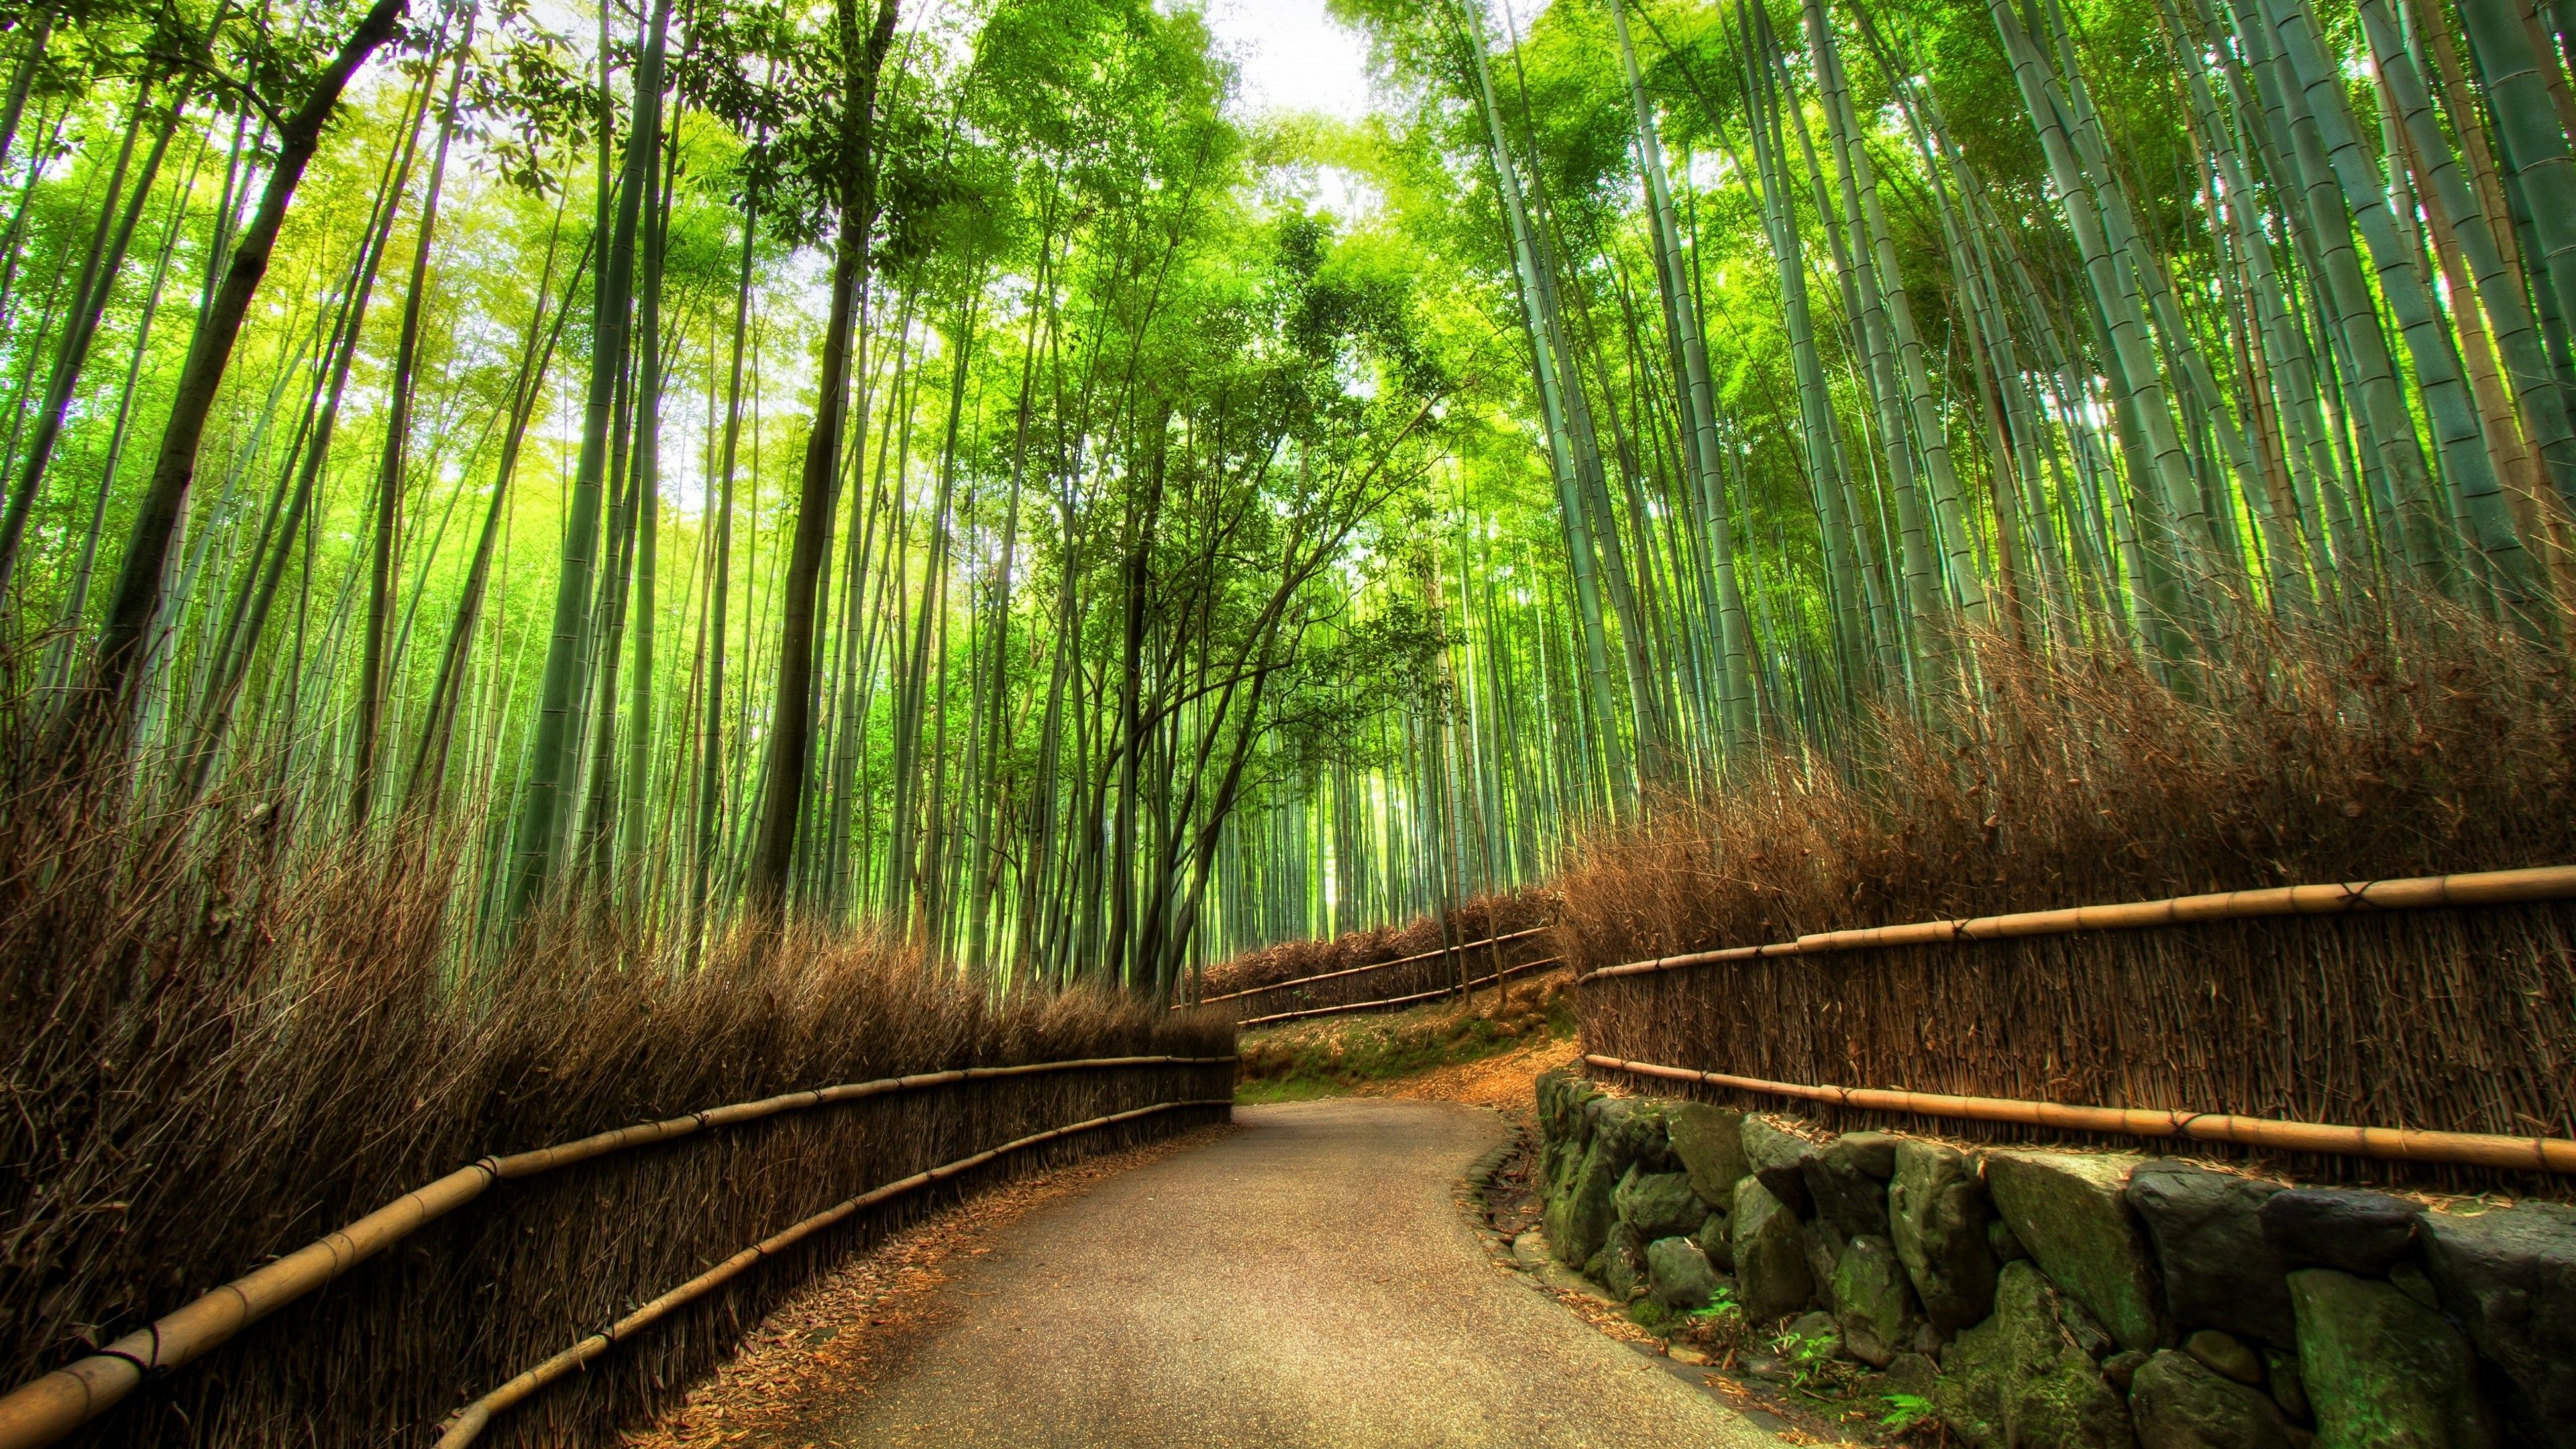 Kyoto forest wallpapers, Tranquil nature, Japan's beauty, Scenic landscapes, 3840x2160 4K Desktop